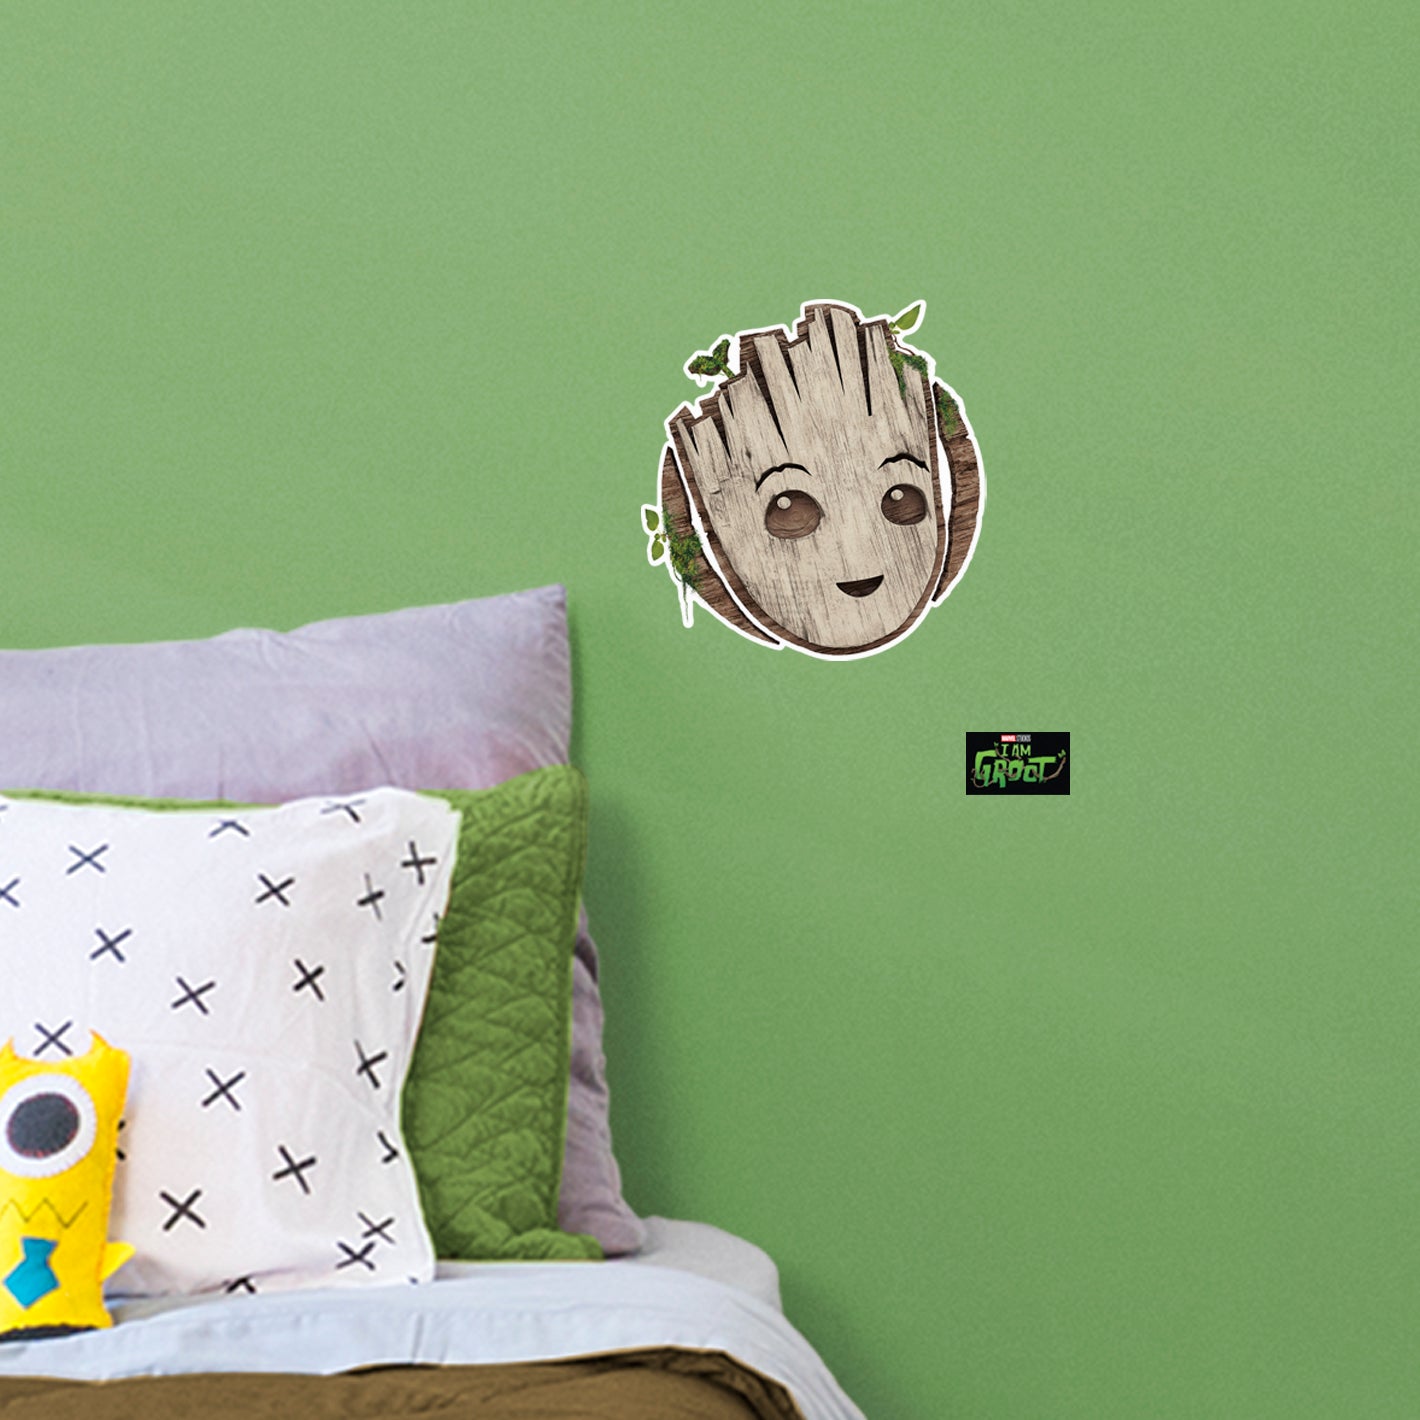 I am Groot: Groot Wooden Badge Icon - Officially Licensed Marvel Removable Adhesive Decal